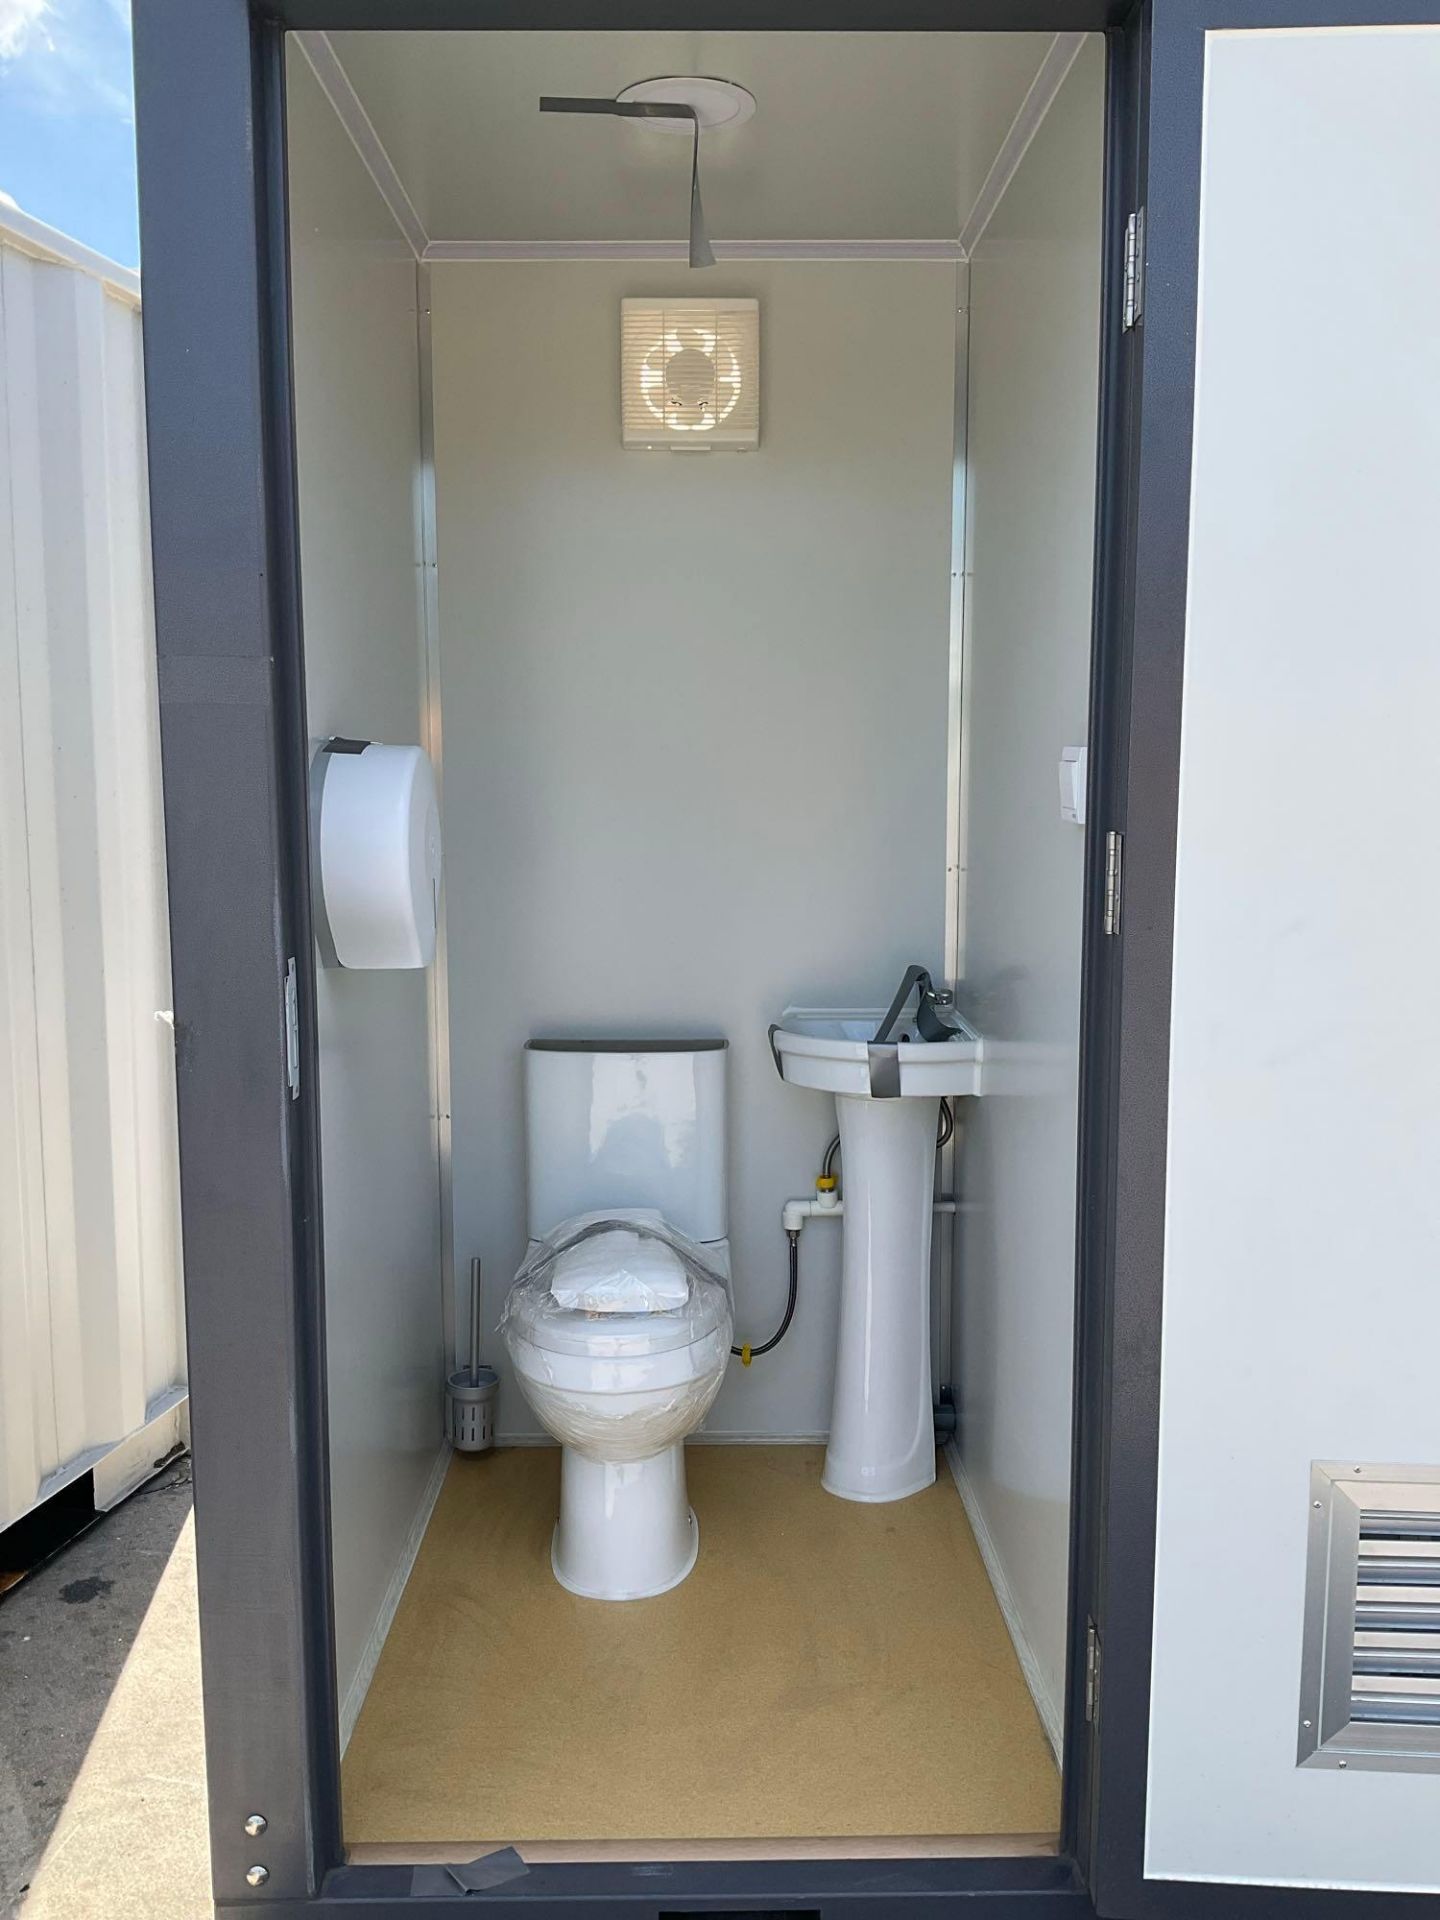 UNUSED PORTABLE DOUBLE BATHROOM UNIT, 2 STALLS, ELECTRIC & PLUMBING HOOK UP WITH EXTERIOR PLUMBIN... - Image 10 of 11